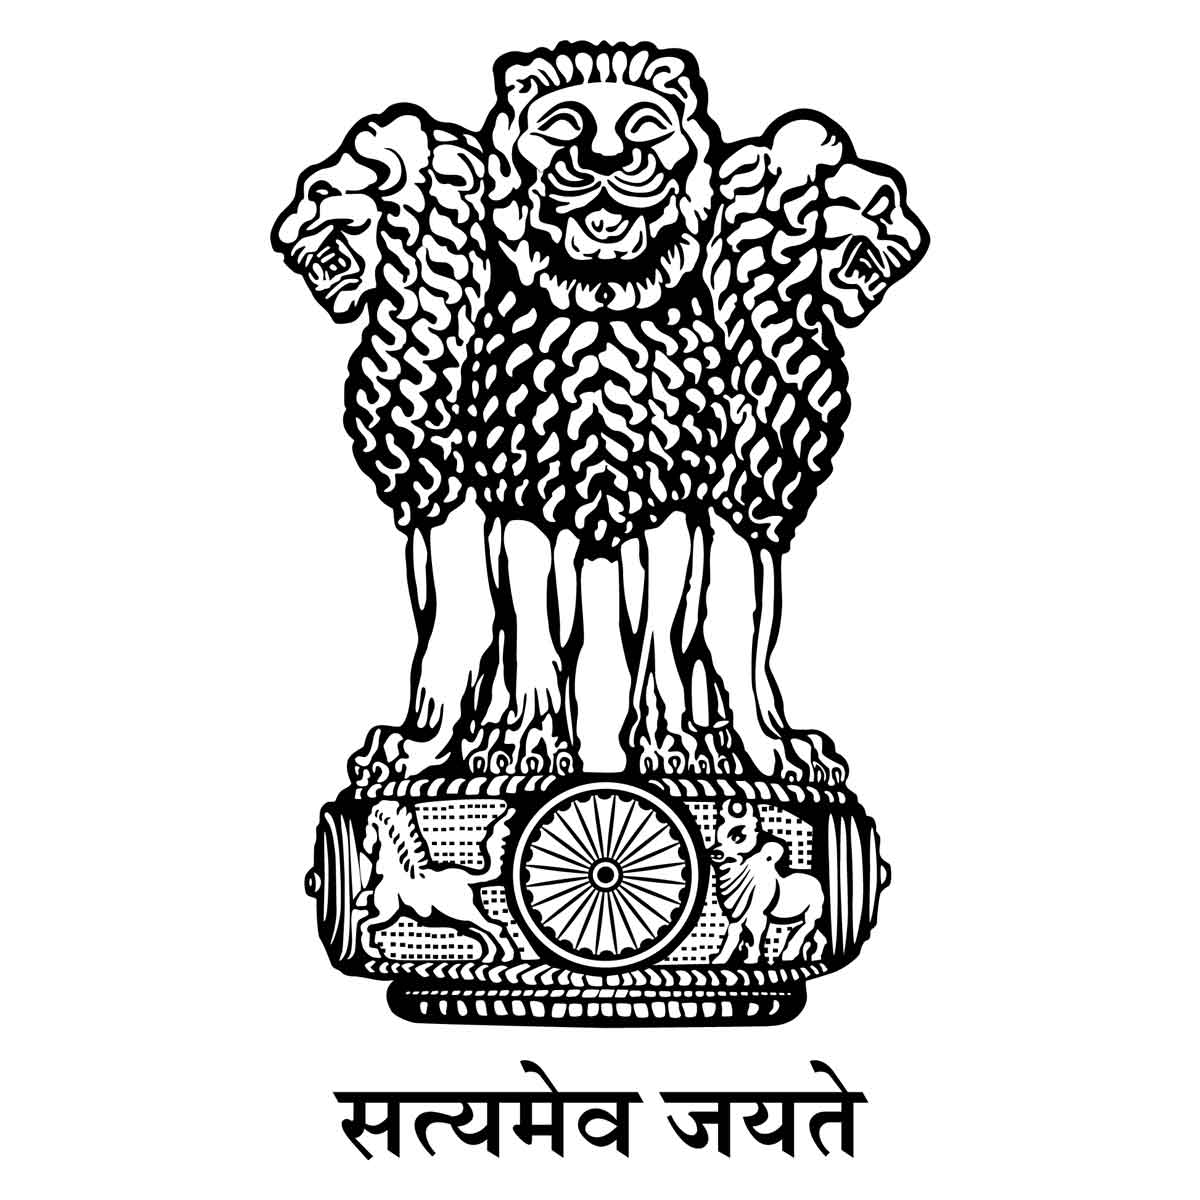 Government Jobs Of India